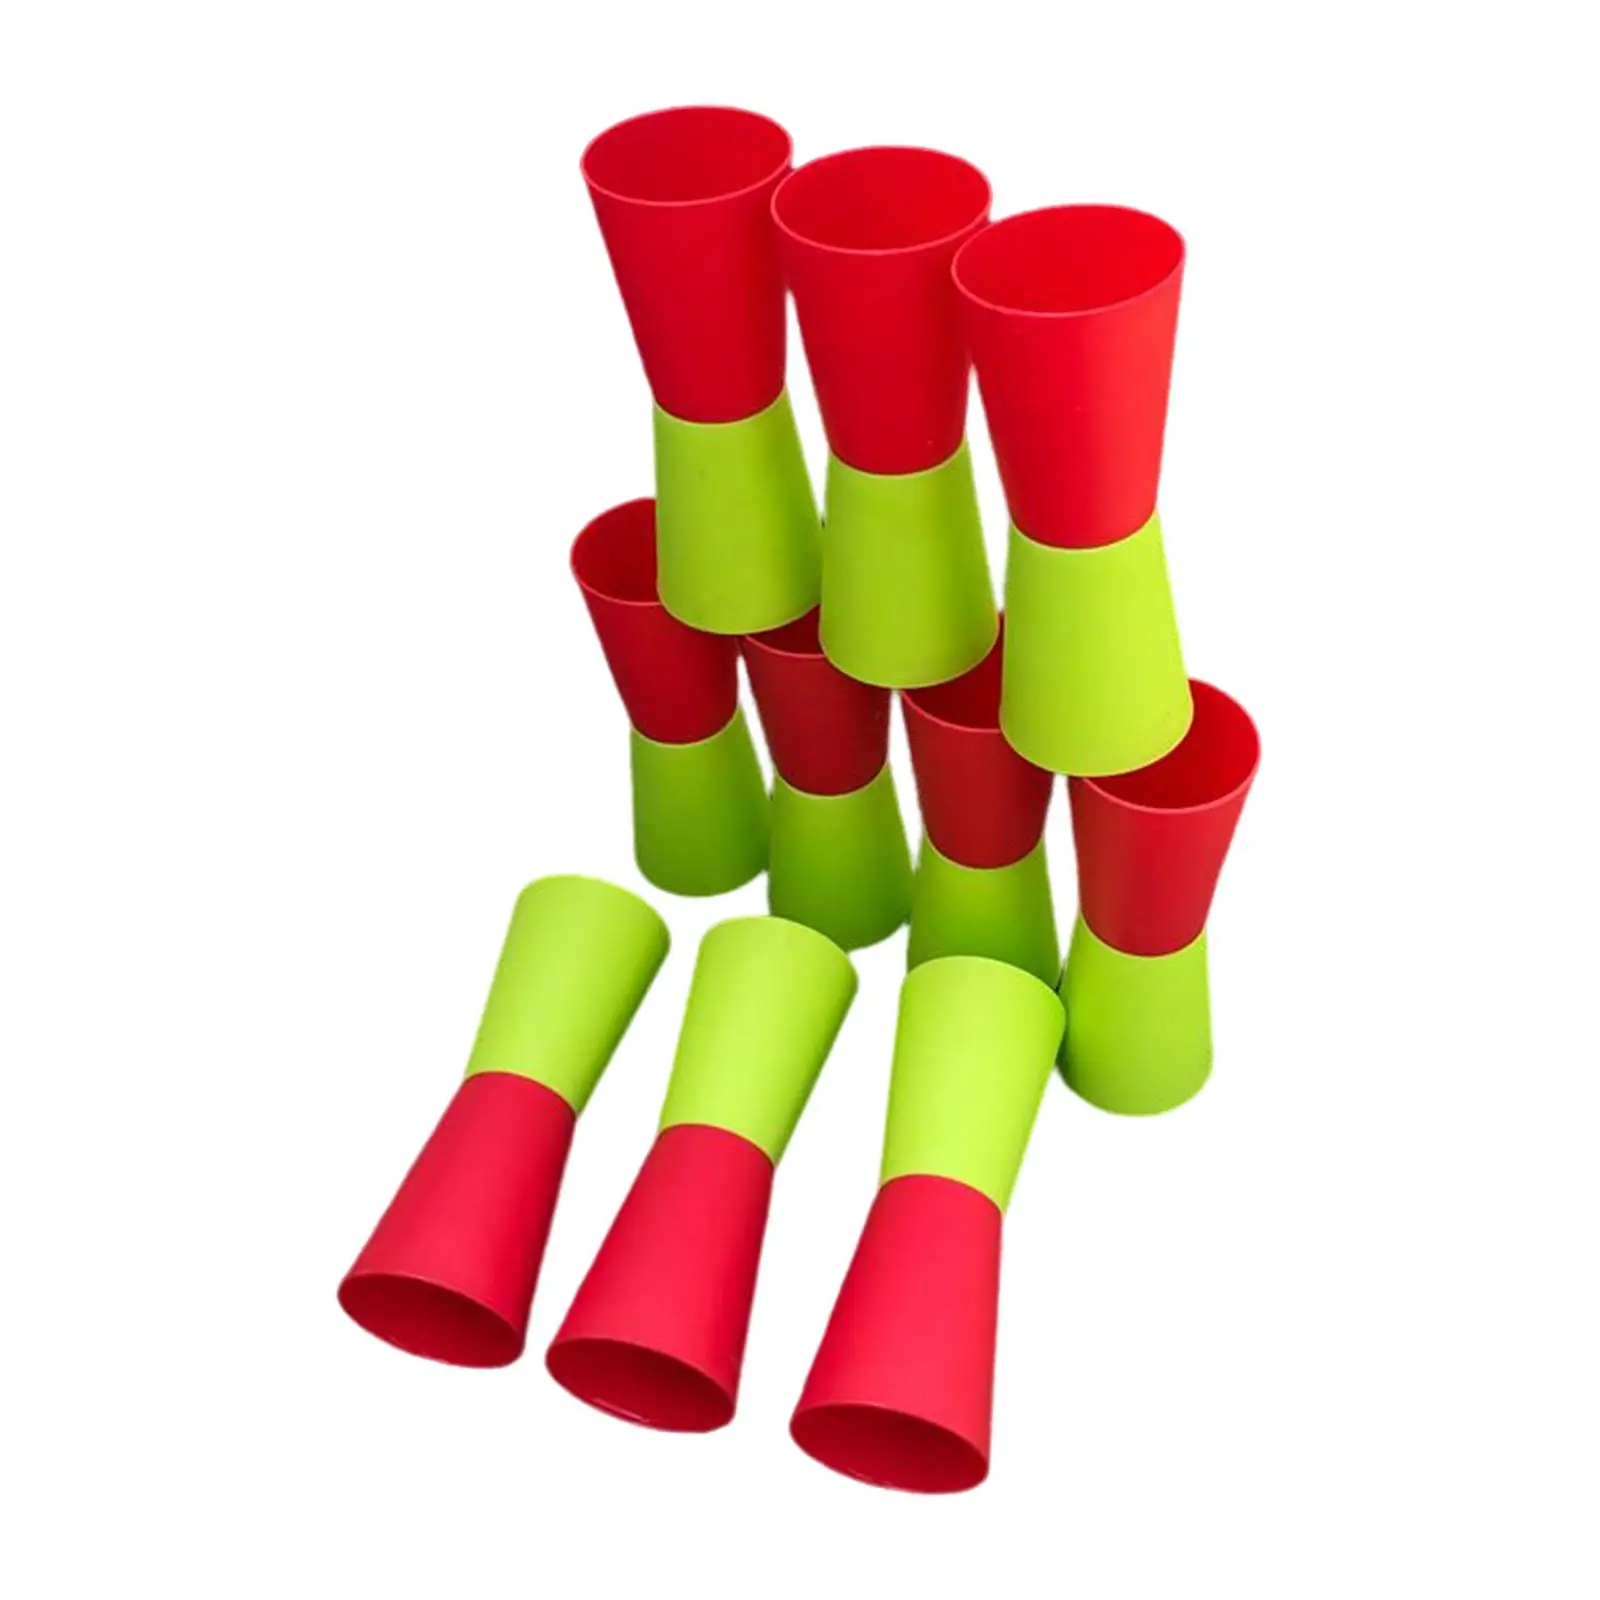 10Pcs Cups Speed Agility Training Running Sport Equipment Aid Reversed Cups for Outdoor Football Events Kindergarten